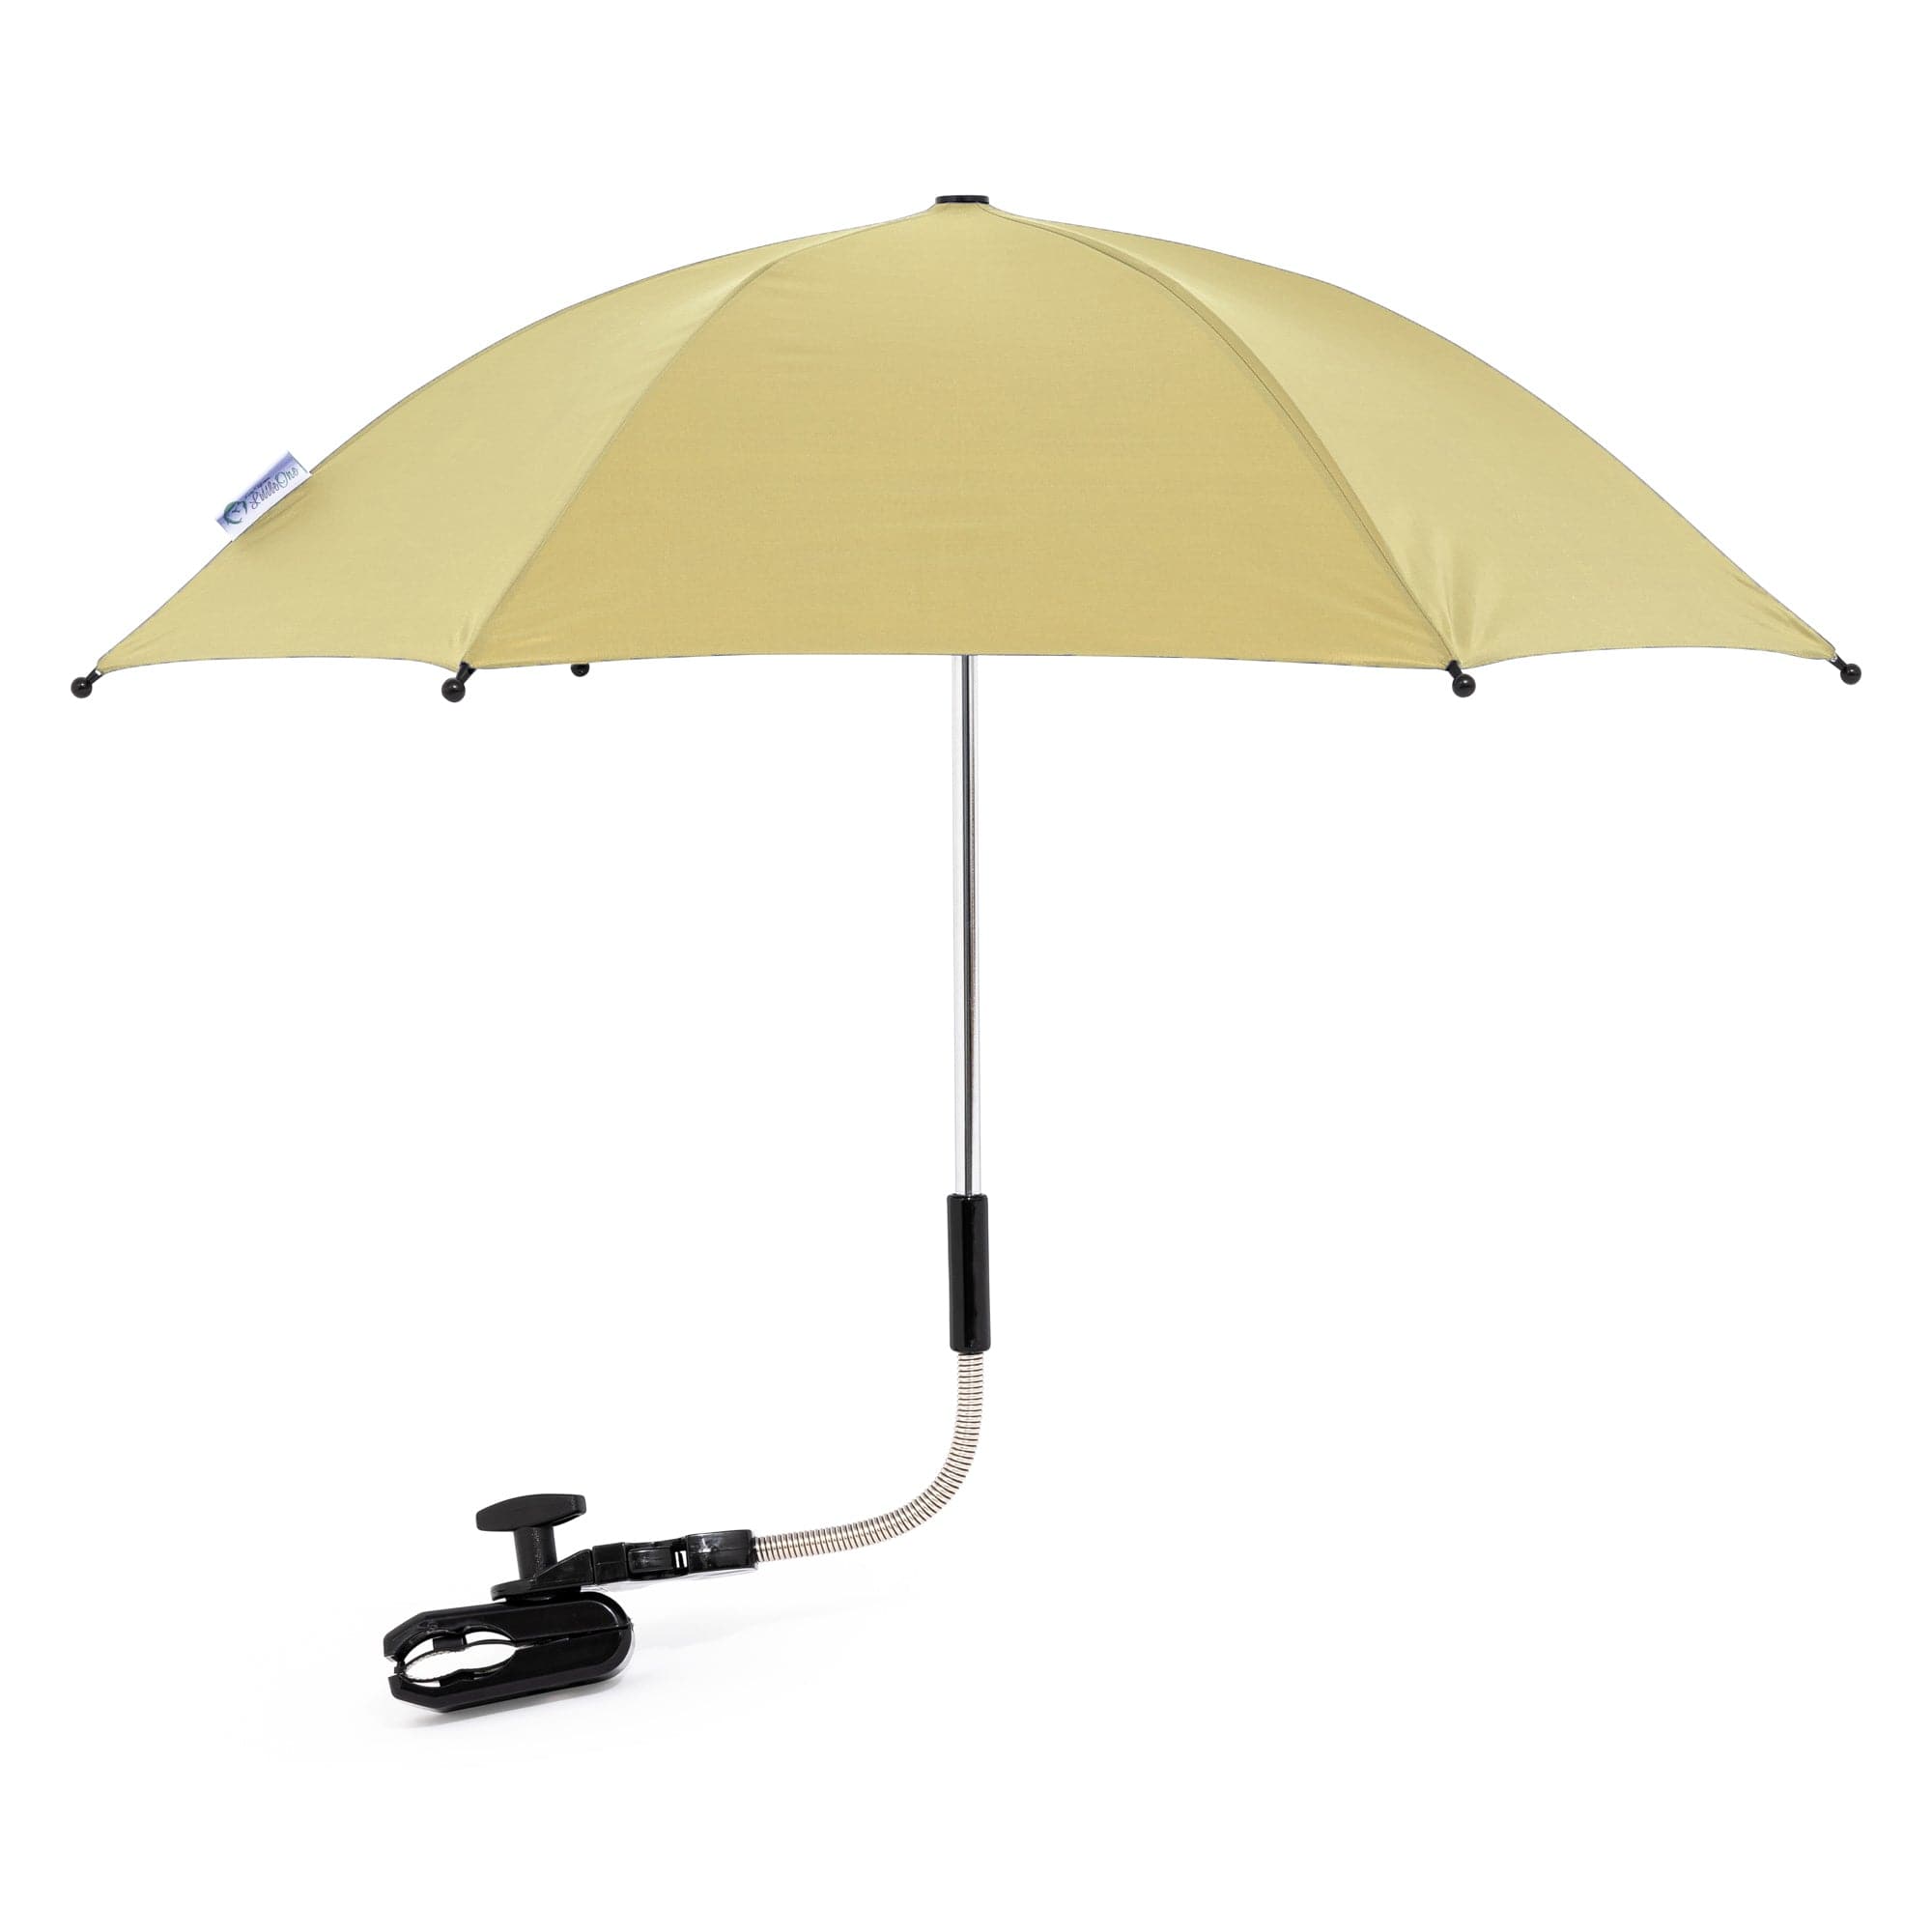 Baby Parasol Compatible With Kiddicouture - Fits All Models - For Your Little One